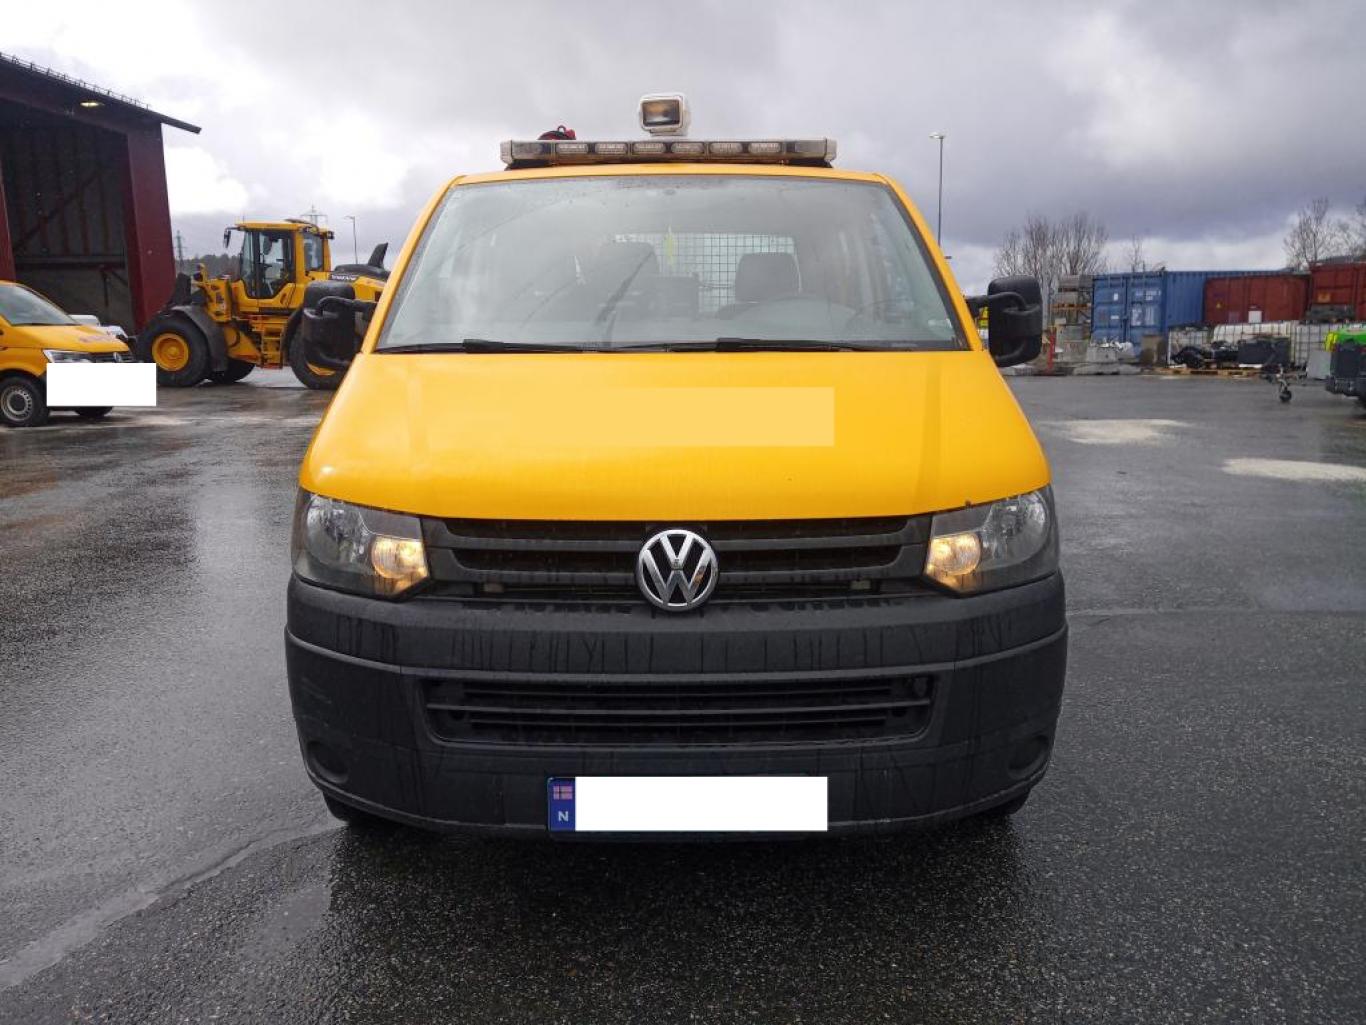 Volkswagen Transporter 2.0 TDI 102hp, 2012 - PS Auction - We value the  future - Largest in net auctions